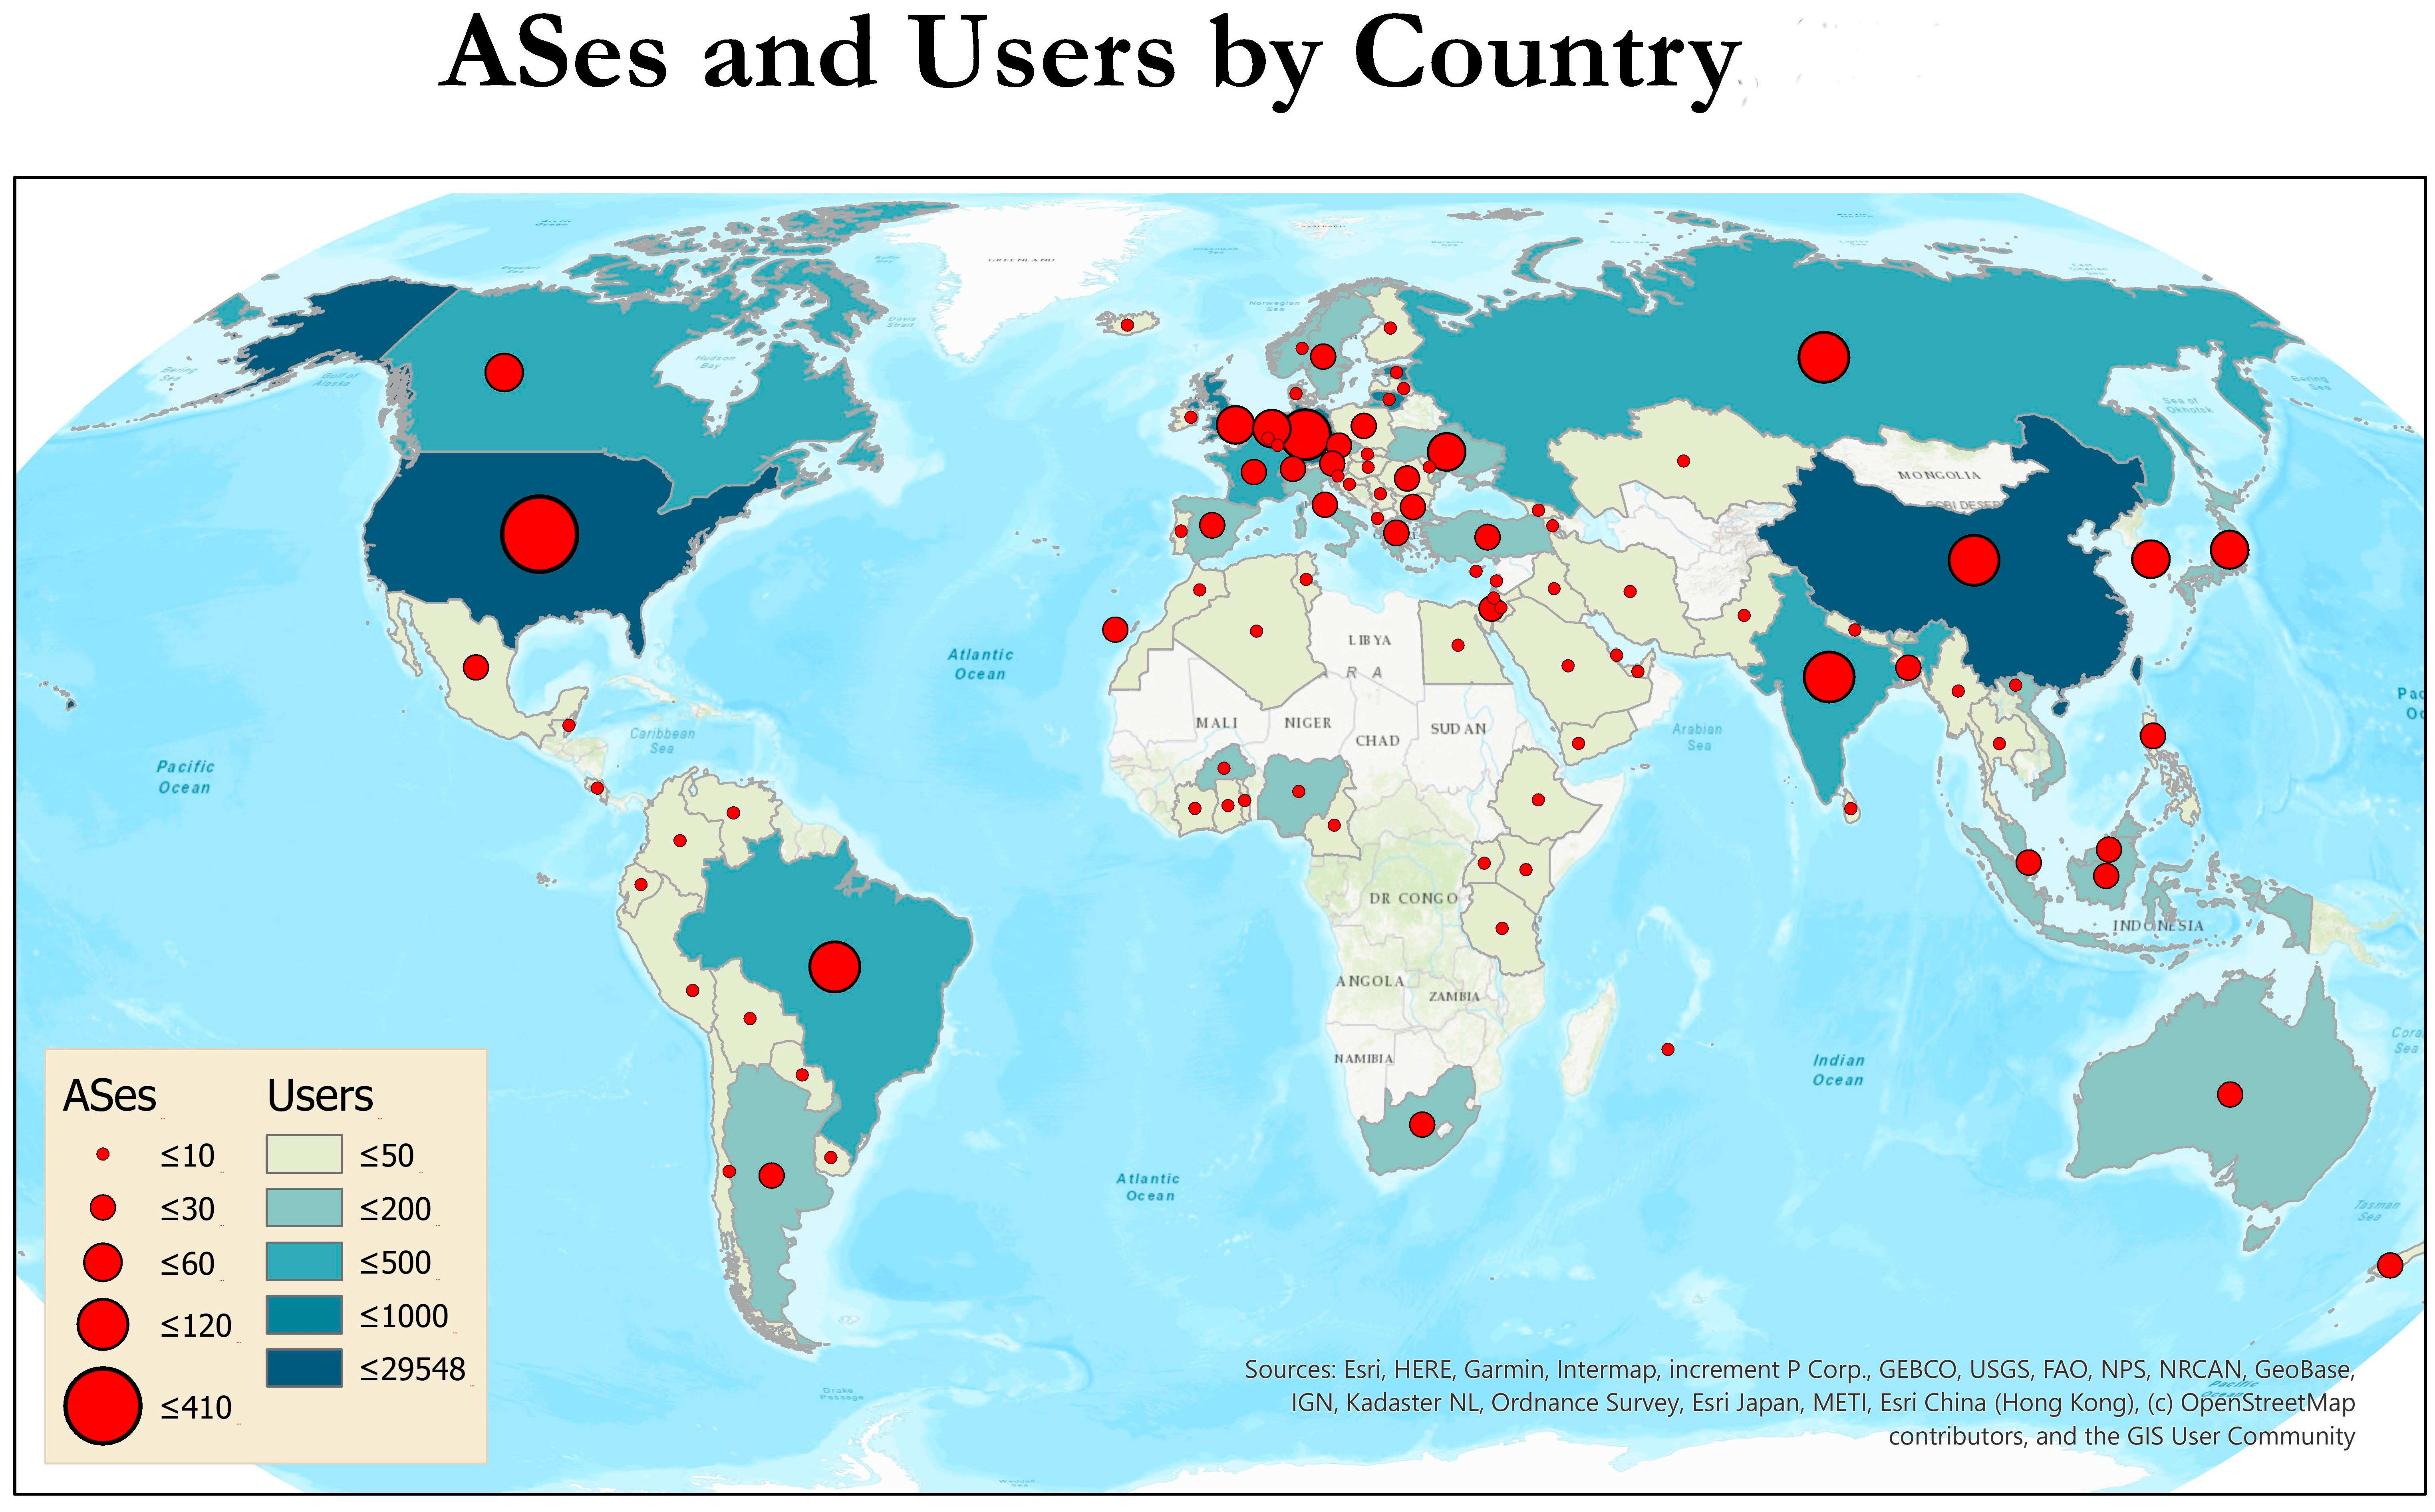 Unique users downloading CAIDA data and corresponding ASes aggregated by country.